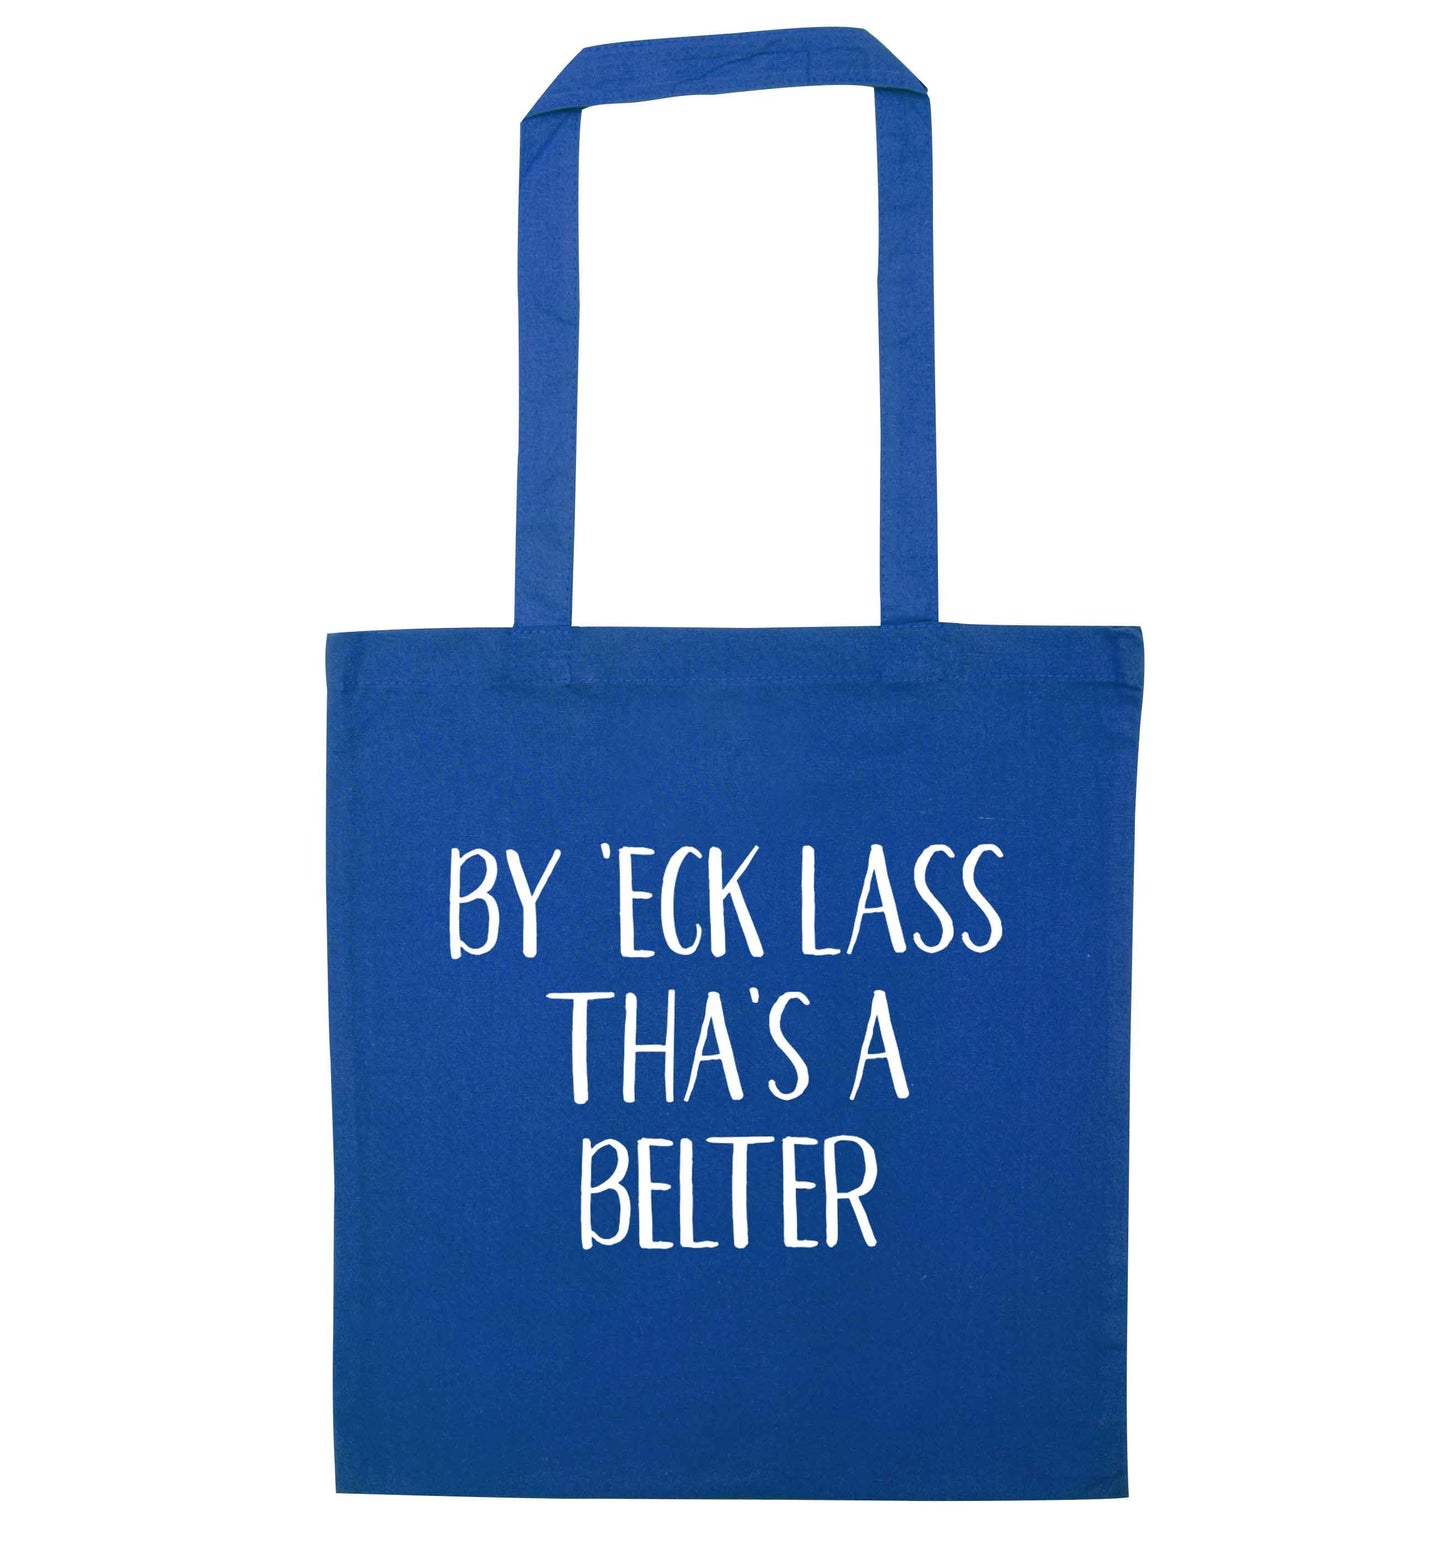 Be 'eck lass tha's a belter blue tote bag